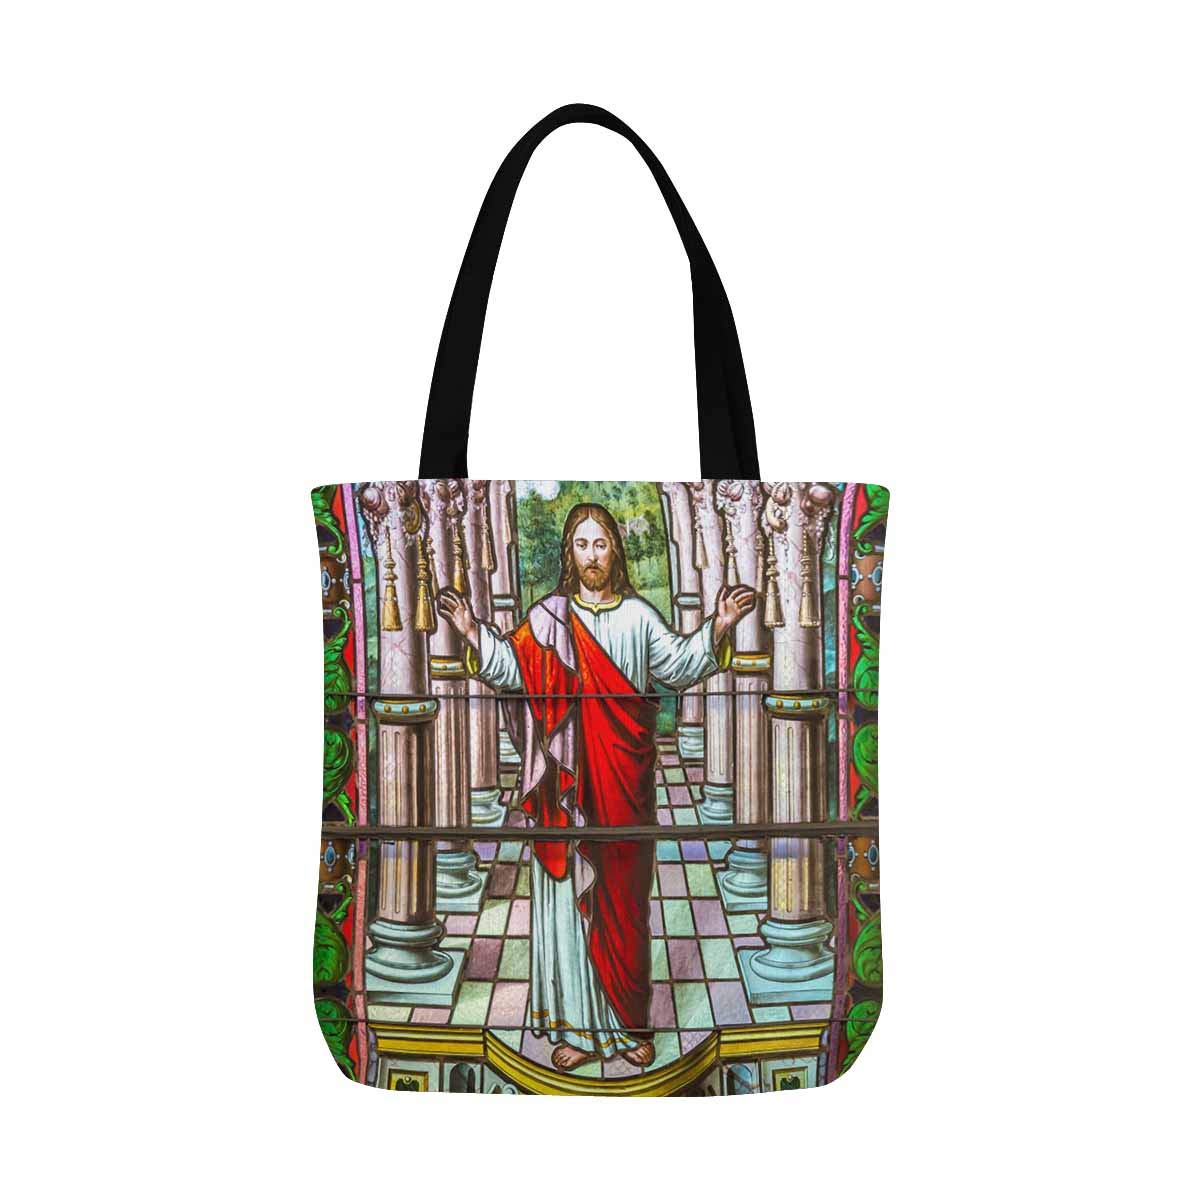 ASHLEIGH Stained Glass Religious Background Canvas Tote Bag Tote Shopping Bag Washable Grocery Tote Bag, Craft Canvas Bag for Women Men Kids - image 2 of 3